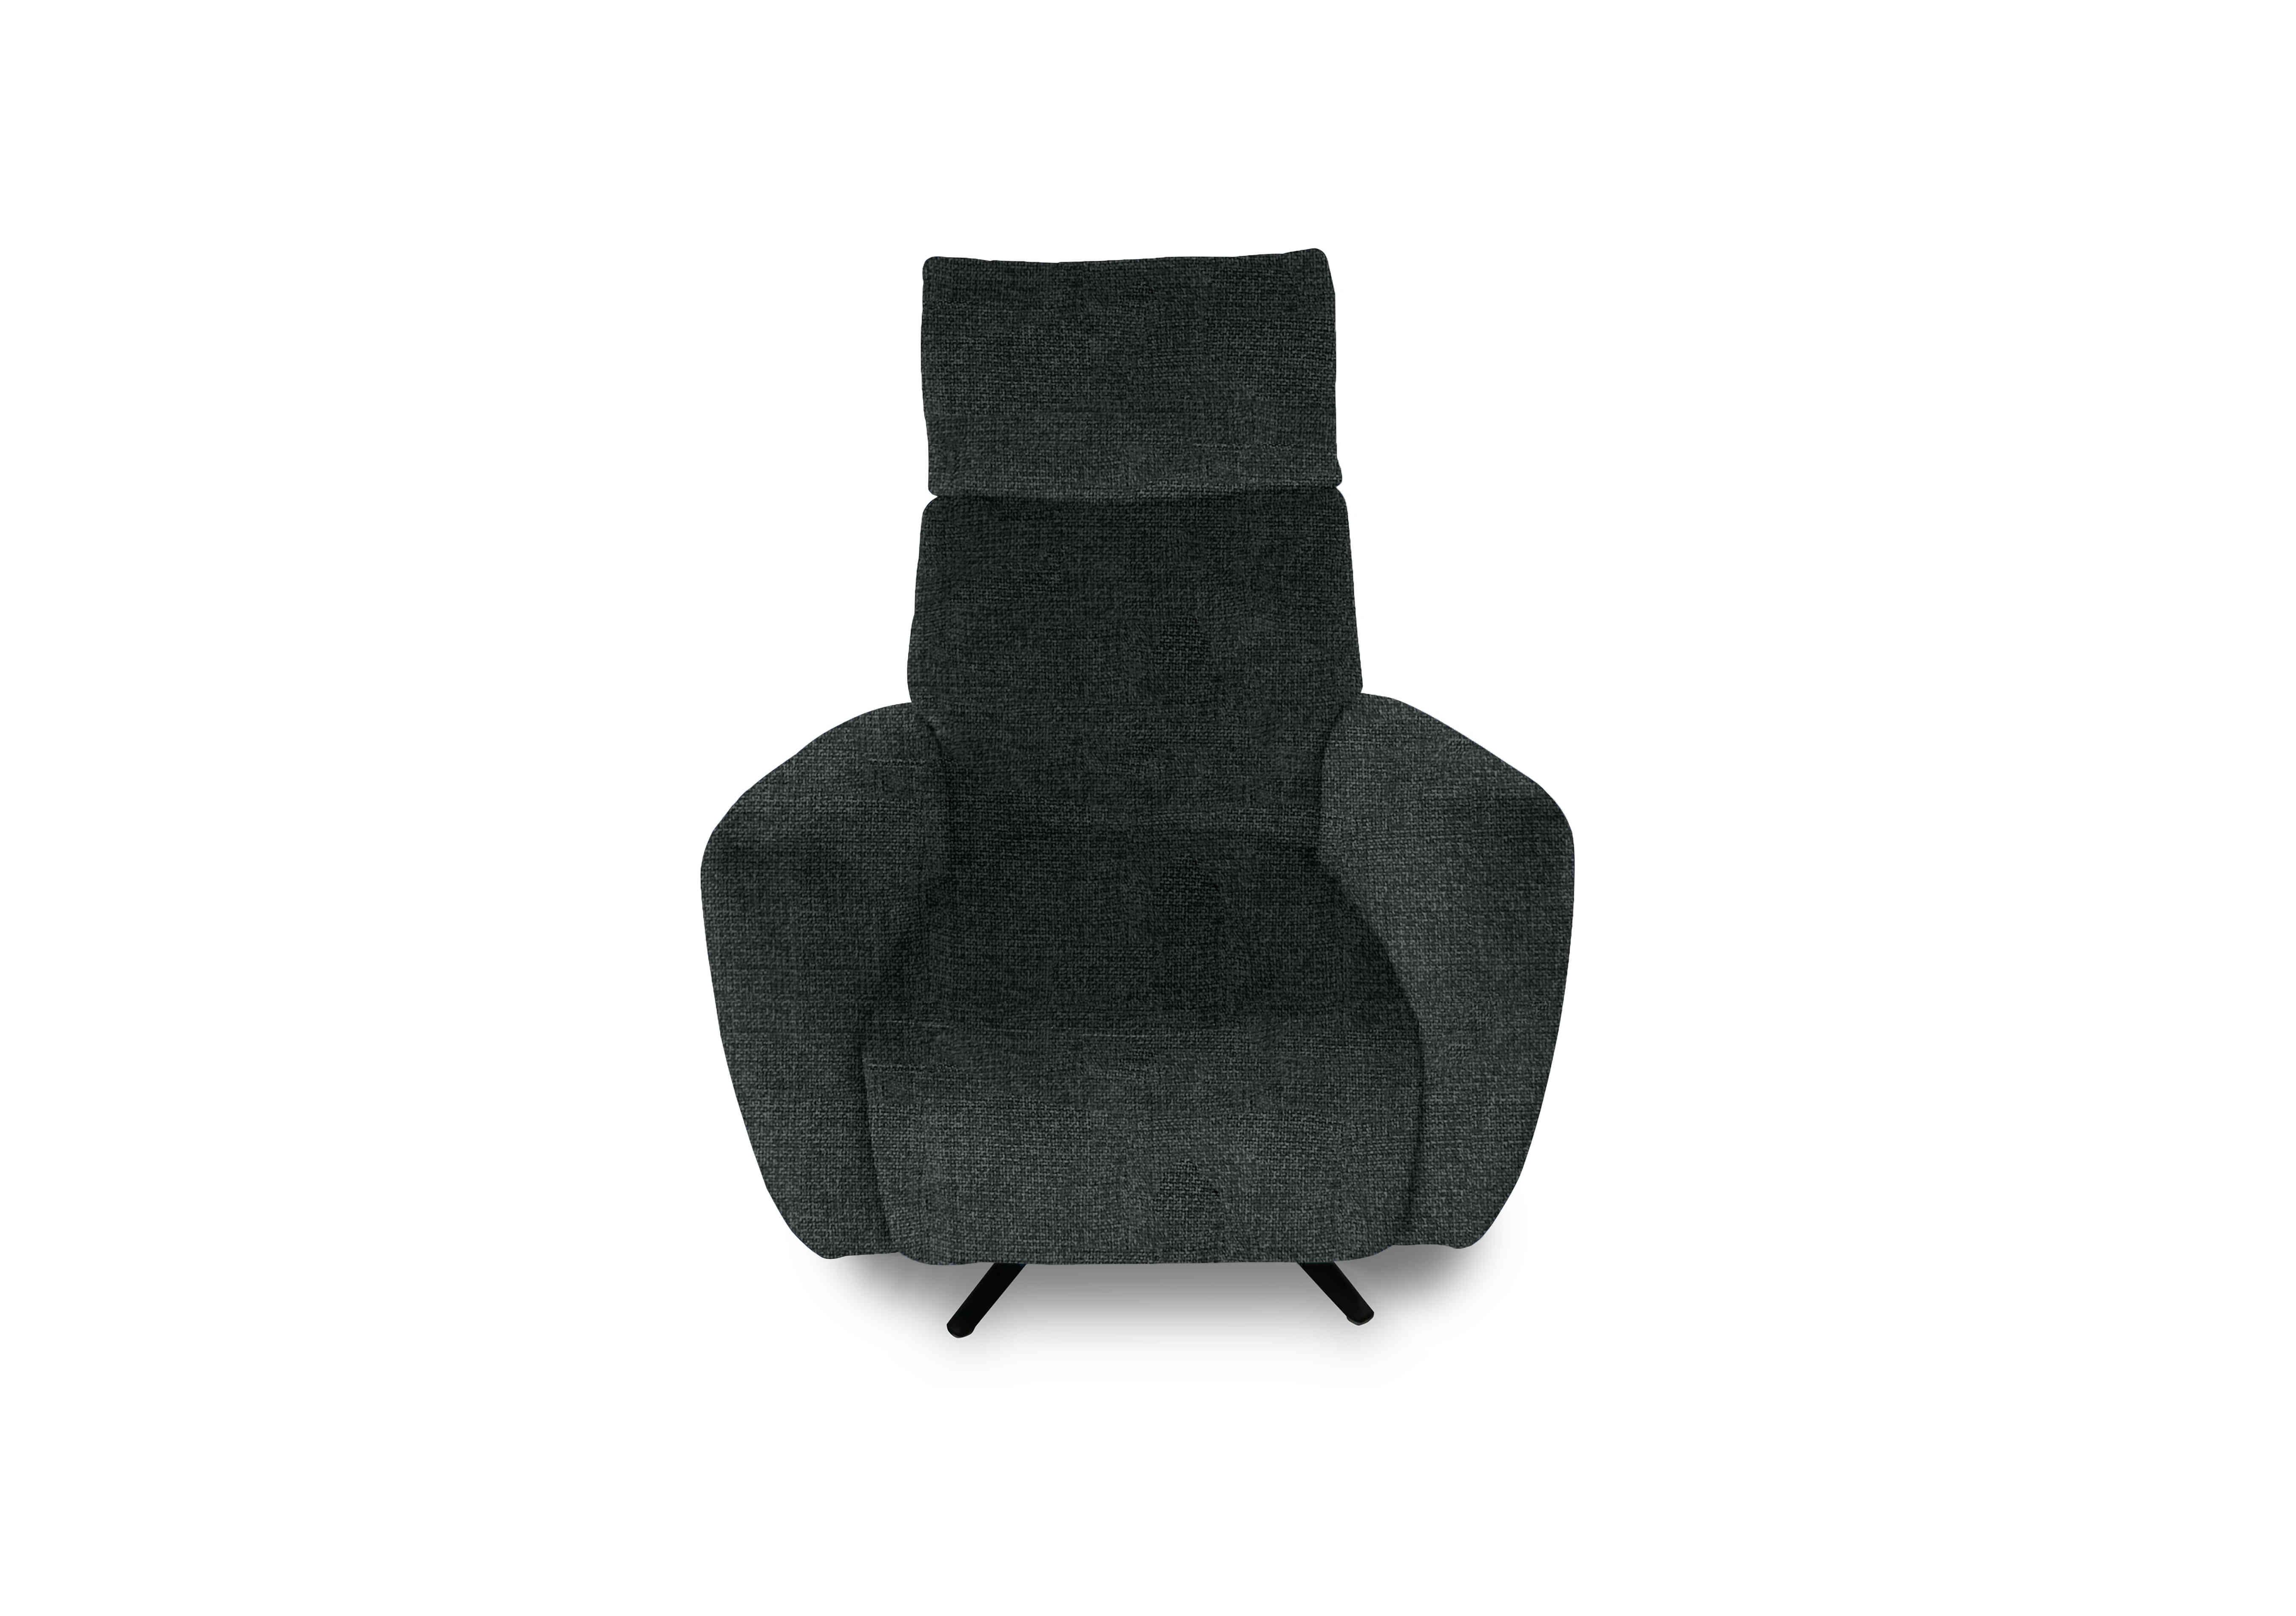 Designer Chair Collection Granada Fabric Power Recliner Swivel Chair with Massage Feature in Fab-Cac-R463 Black Mica on Furniture Village